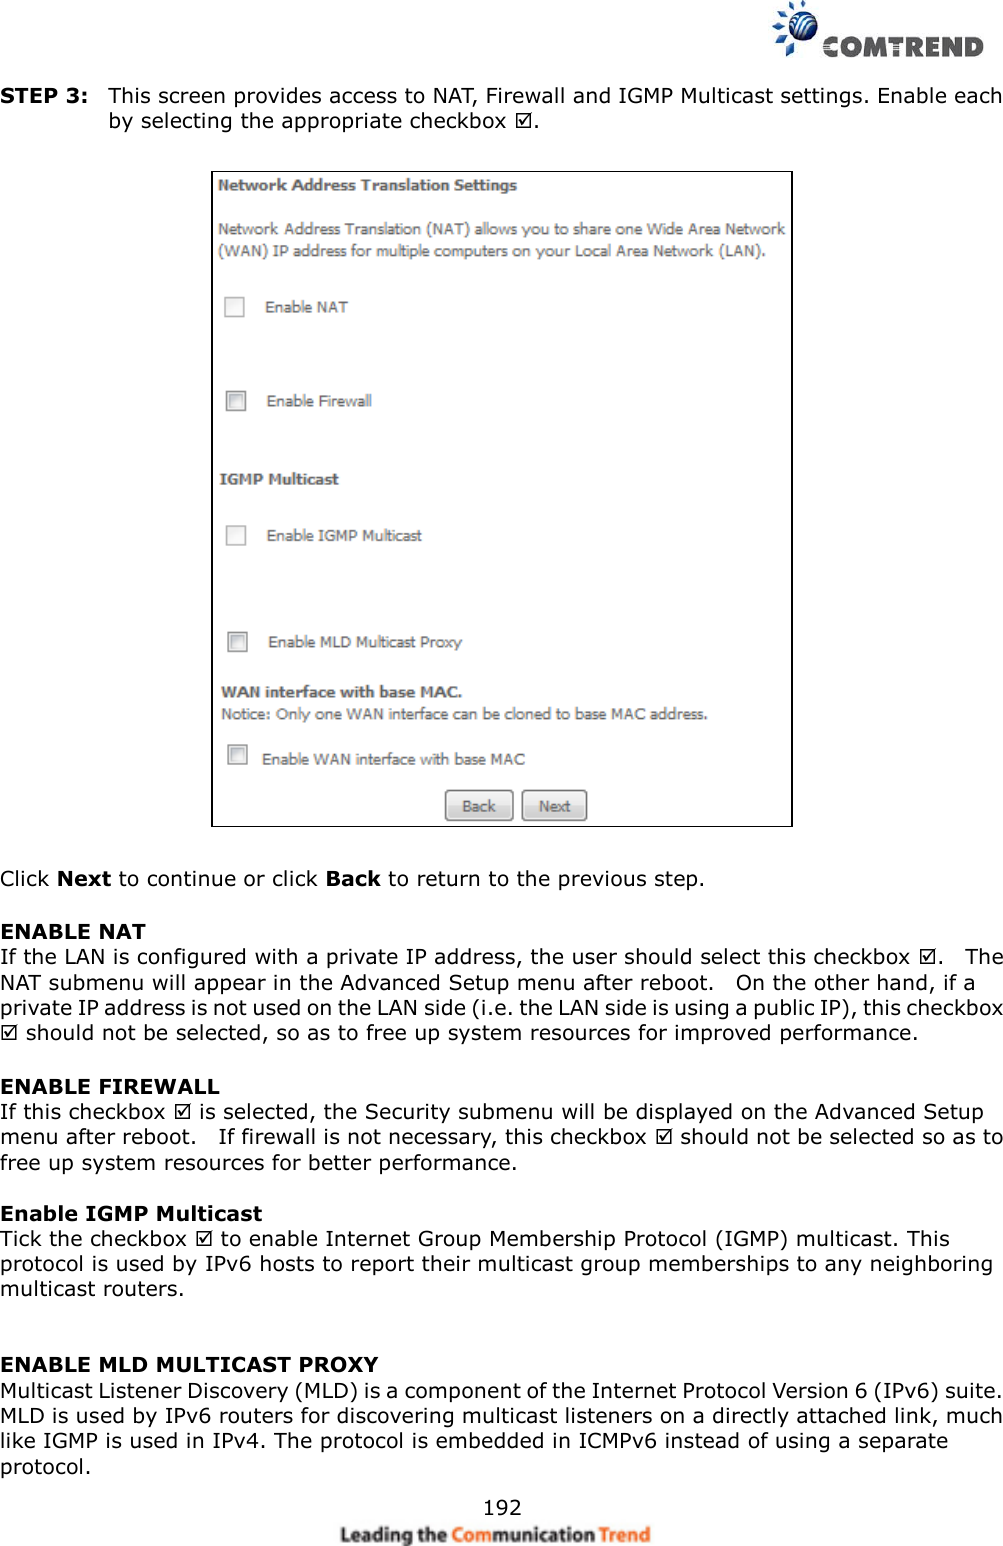     192 STEP 3:  This screen provides access to NAT, Firewall and IGMP Multicast settings. Enable each by selecting the appropriate checkbox .      Click Next to continue or click Back to return to the previous step. ENABLE NAT If the LAN is configured with a private IP address, the user should select this checkbox .    The NAT submenu will appear in the Advanced Setup menu after reboot.    On the other hand, if a private IP address is not used on the LAN side (i.e. the LAN side is using a public IP), this checkbox  should not be selected, so as to free up system resources for improved performance. ENABLE FIREWALL If this checkbox  is selected, the Security submenu will be displayed on the Advanced Setup menu after reboot.    If firewall is not necessary, this checkbox  should not be selected so as to free up system resources for better performance.    Enable IGMP Multicast   Tick the checkbox  to enable Internet Group Membership Protocol (IGMP) multicast. This protocol is used by IPv6 hosts to report their multicast group memberships to any neighboring multicast routers.    ENABLE MLD MULTICAST PROXY Multicast Listener Discovery (MLD) is a component of the Internet Protocol Version 6 (IPv6) suite. MLD is used by IPv6 routers for discovering multicast listeners on a directly attached link, much like IGMP is used in IPv4. The protocol is embedded in ICMPv6 instead of using a separate protocol. 